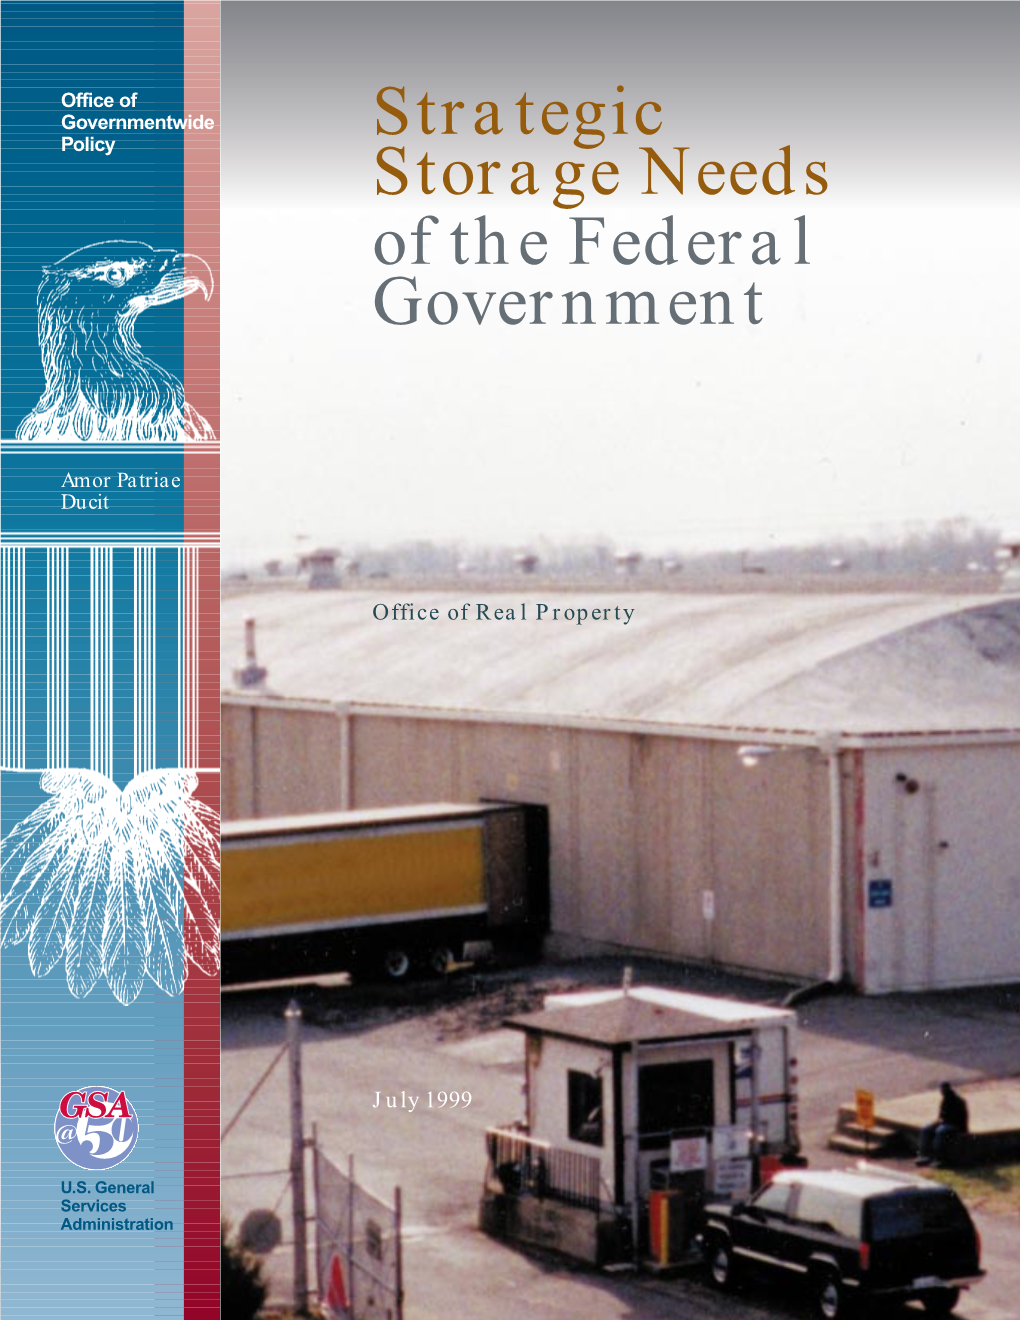 Strategic Storage Needs of the Federal Government